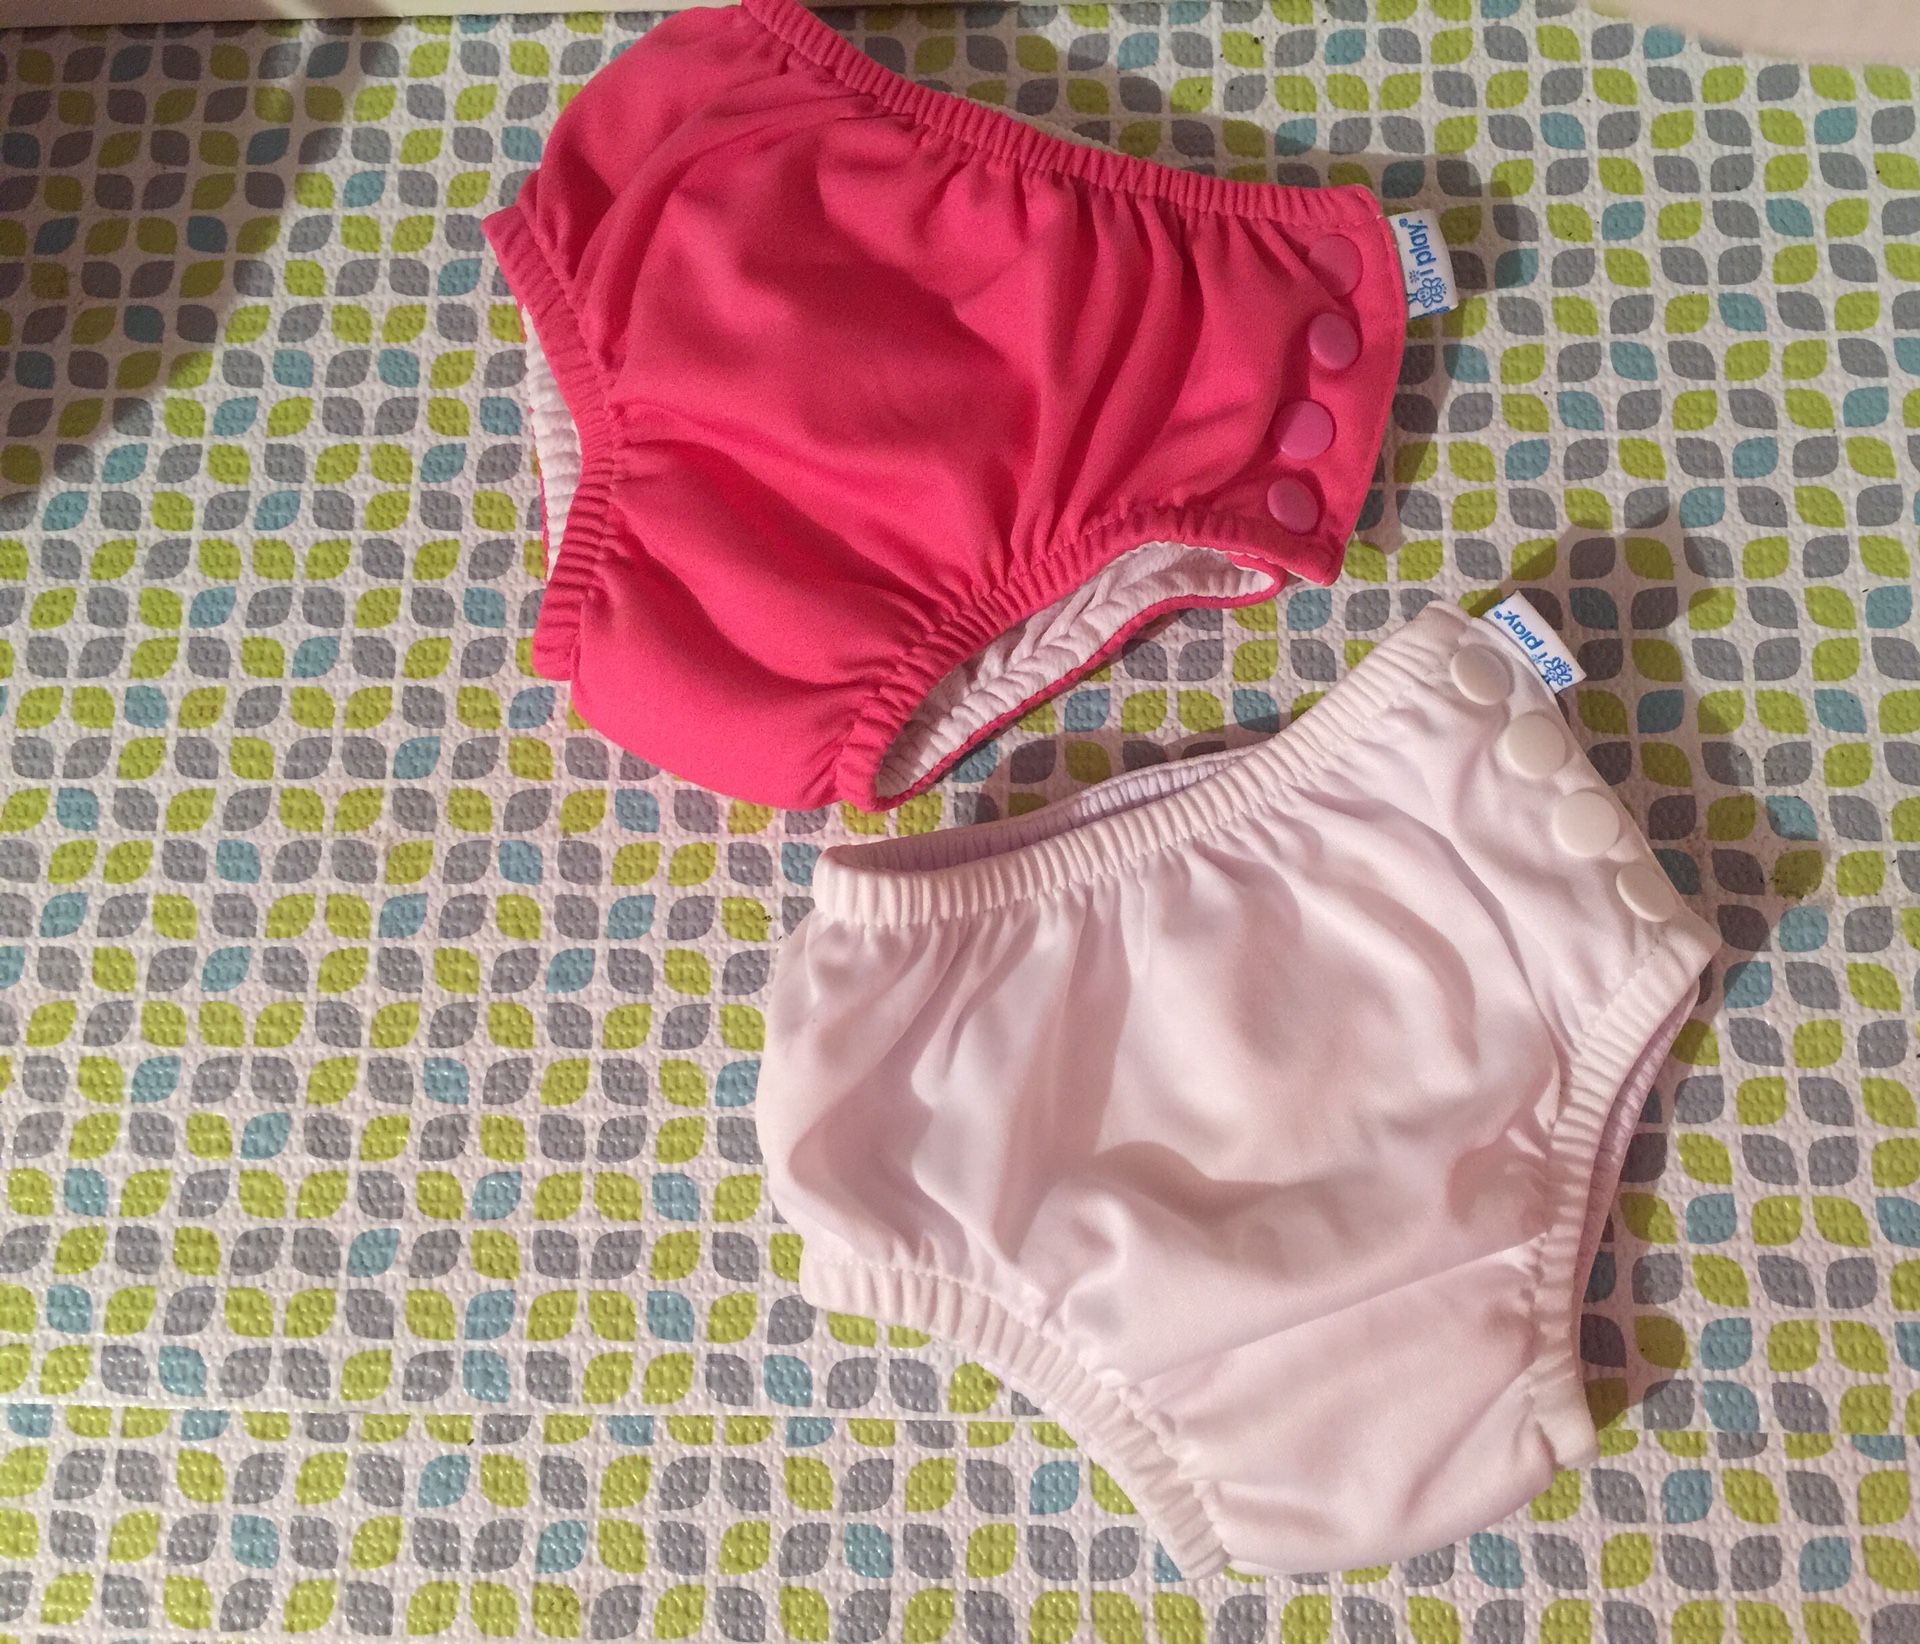 Snap Reusable Swimsuit Diaper / 6 months 10 -18 pounds baby / in new condition/ $10 for Both- 🦁✨